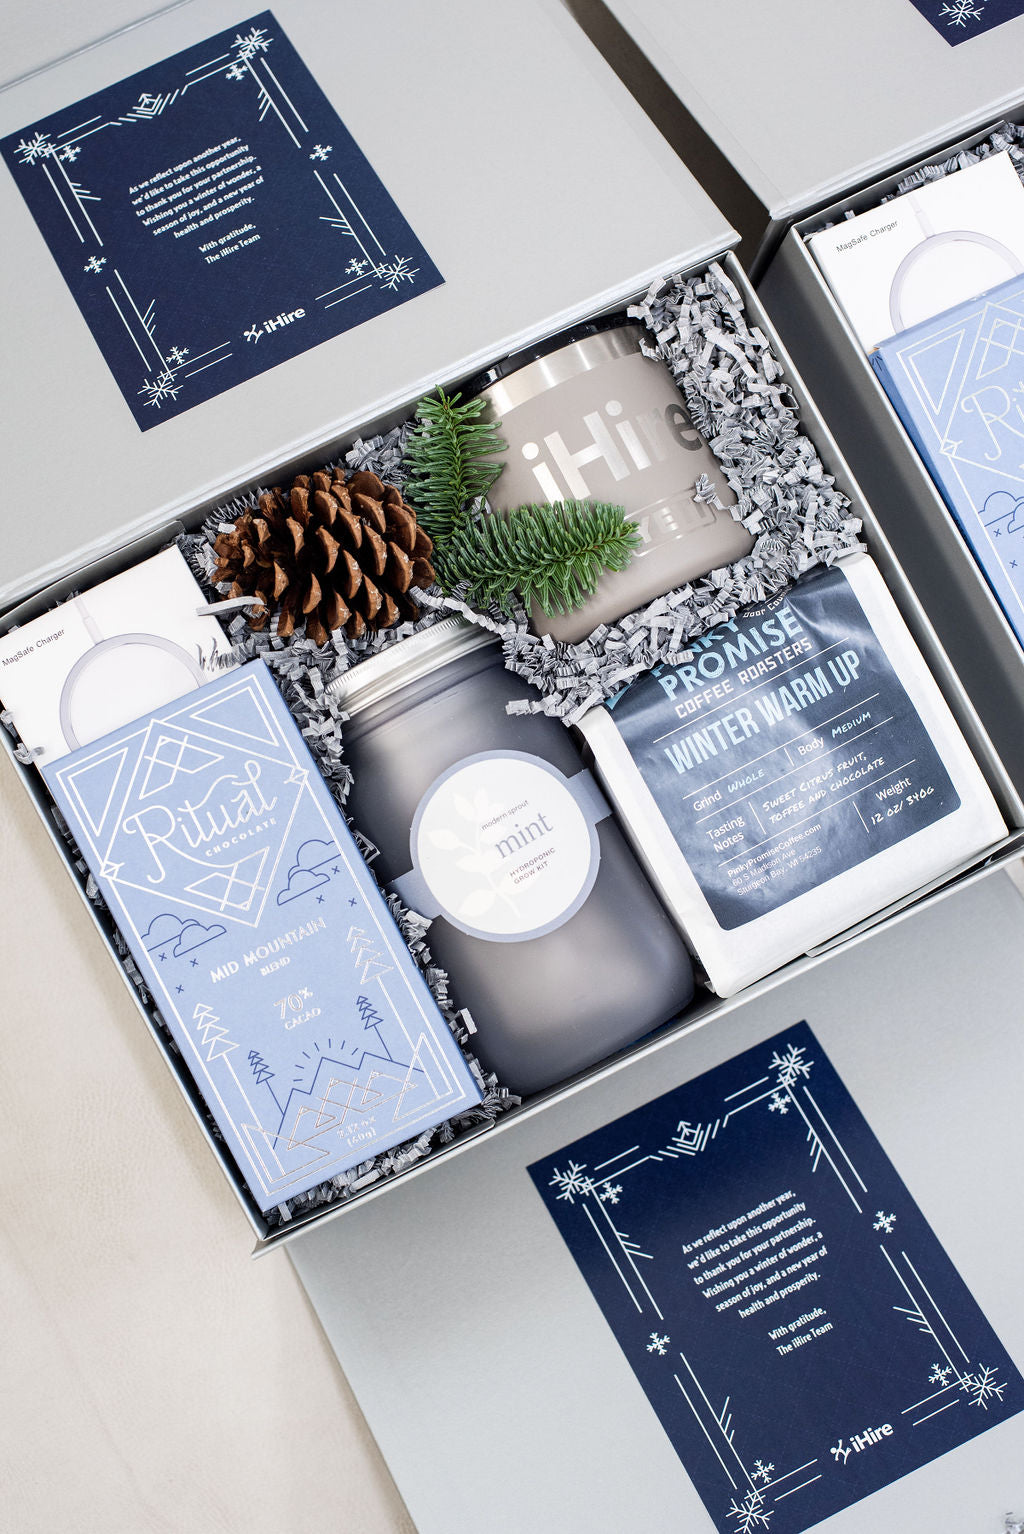  Desk Refresh Holiday Gift Boxes for iHire